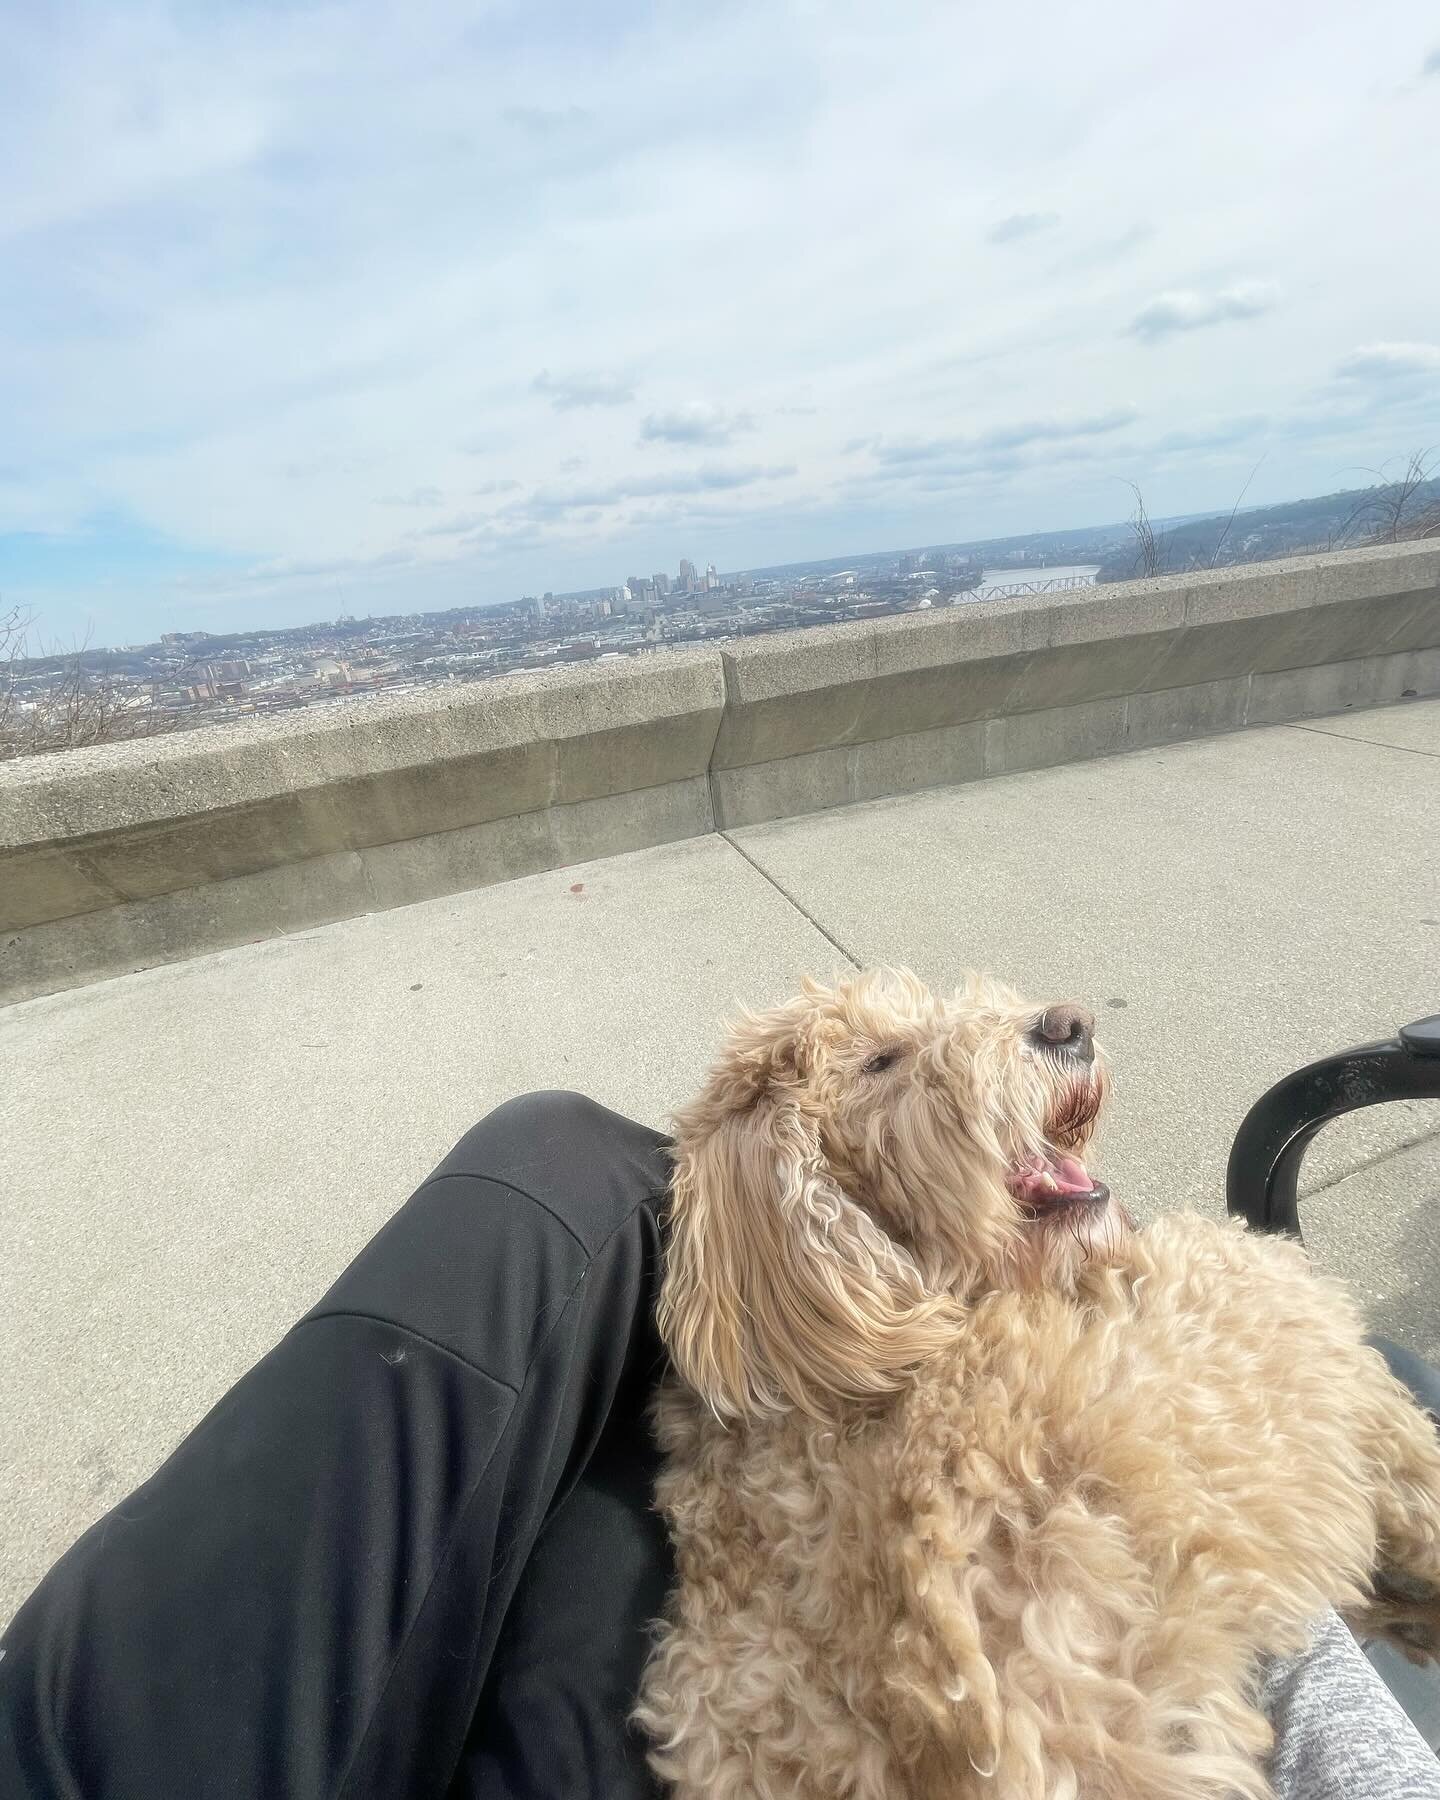 🌞🐾🦮Dreamy exercise and 💖 lovins today with this sweet dog from my neighborhood 🏘️ he loves to climb that hill and observe the beautiful city 🏙️ his parent is on vacation and is so thrilled with their connected loving petcare, they get play-by-p